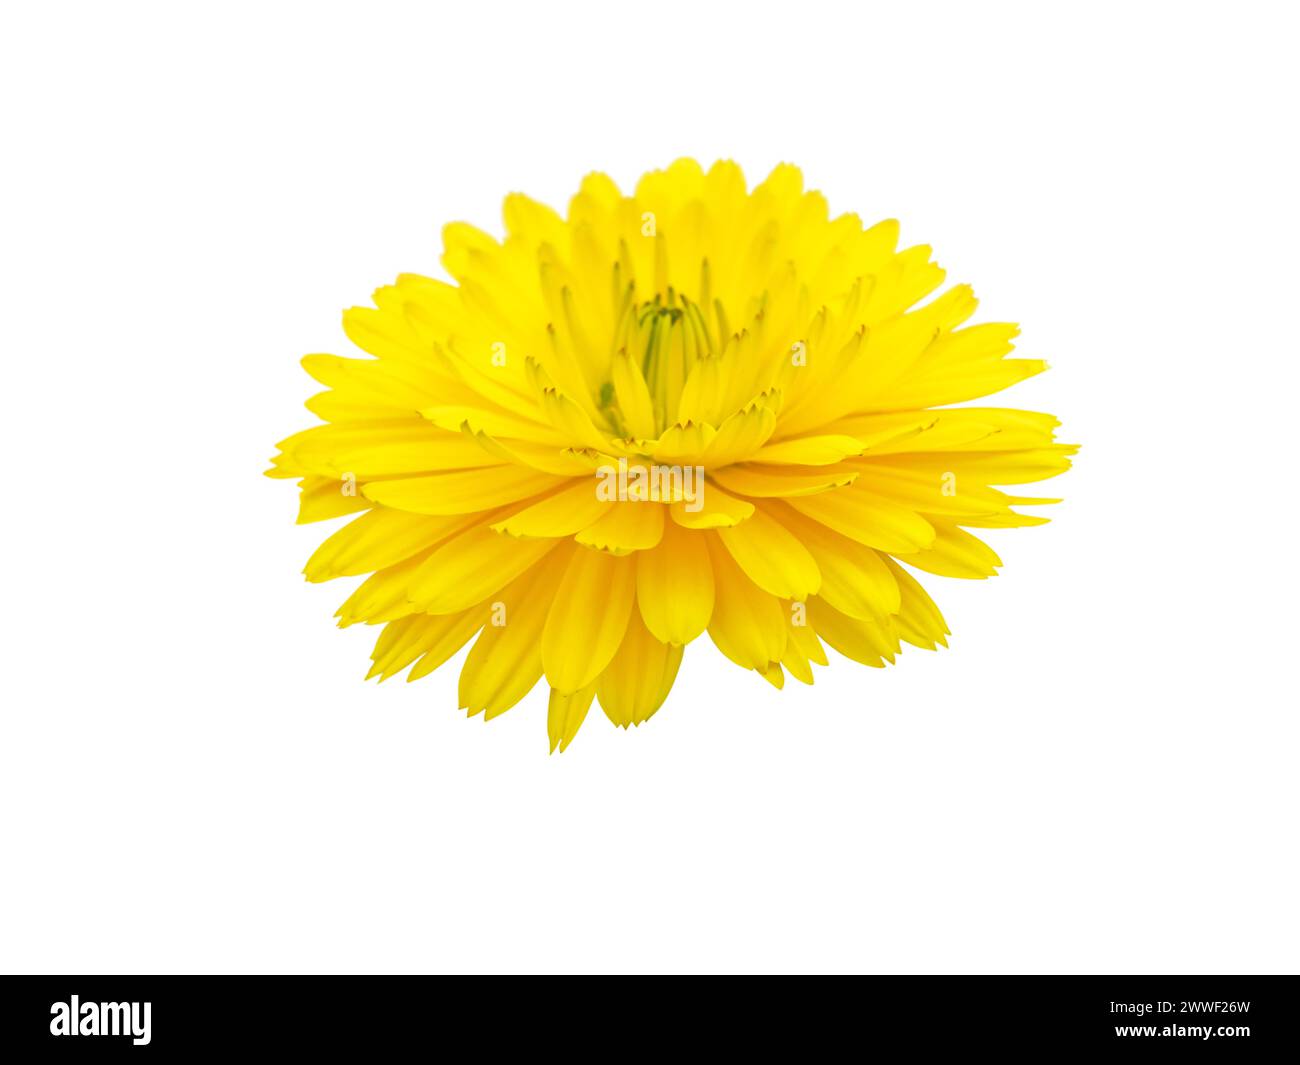 Calendula officinalis bright yellow flower isolated on white. Marigold flowering medicinal plant. Stock Photo